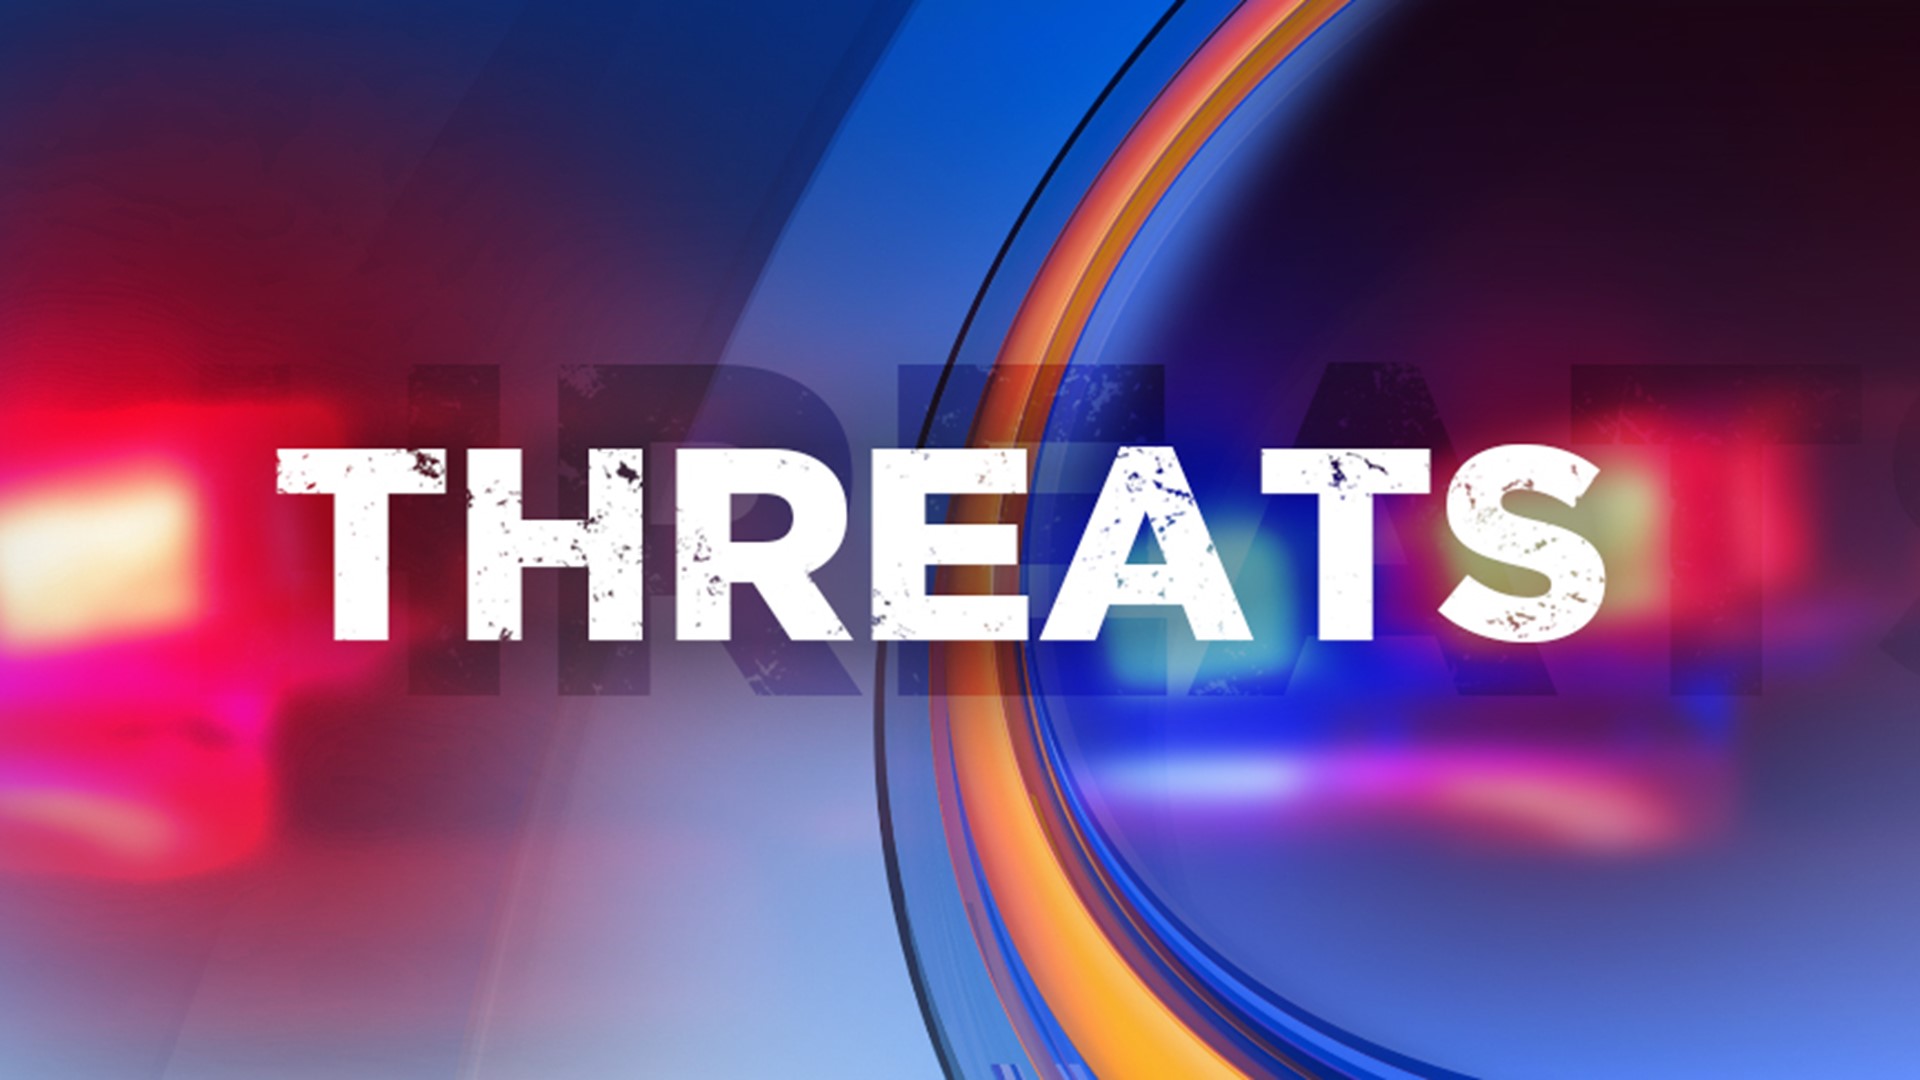 School District Increases Security After Threatening Video Surfaces